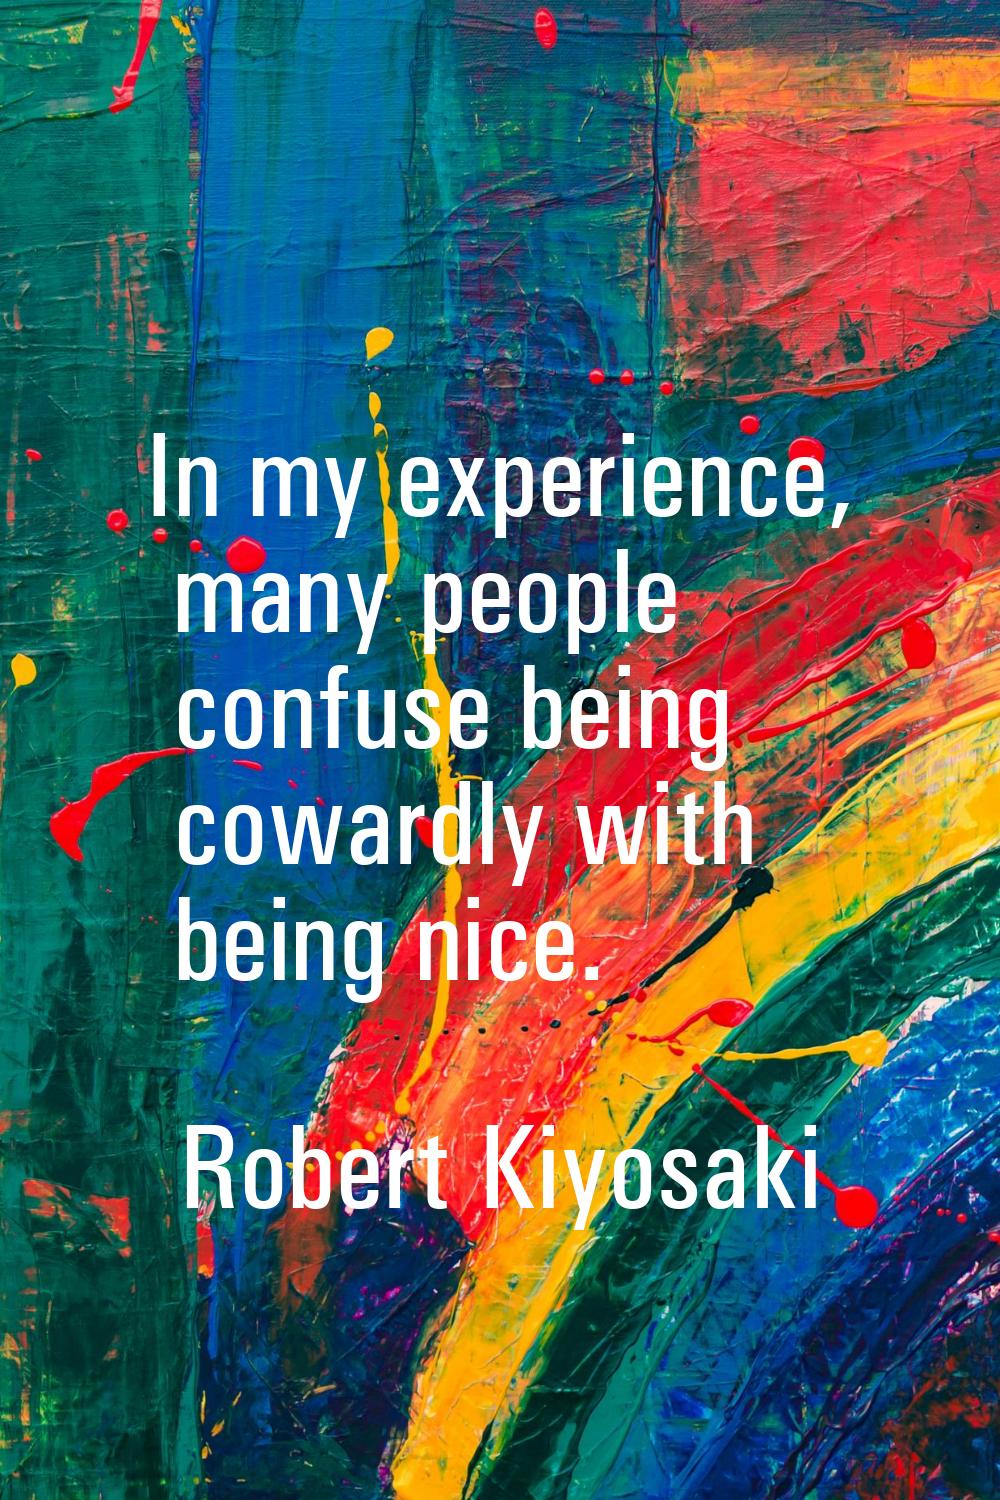 In my experience, many people confuse being cowardly with being nice.